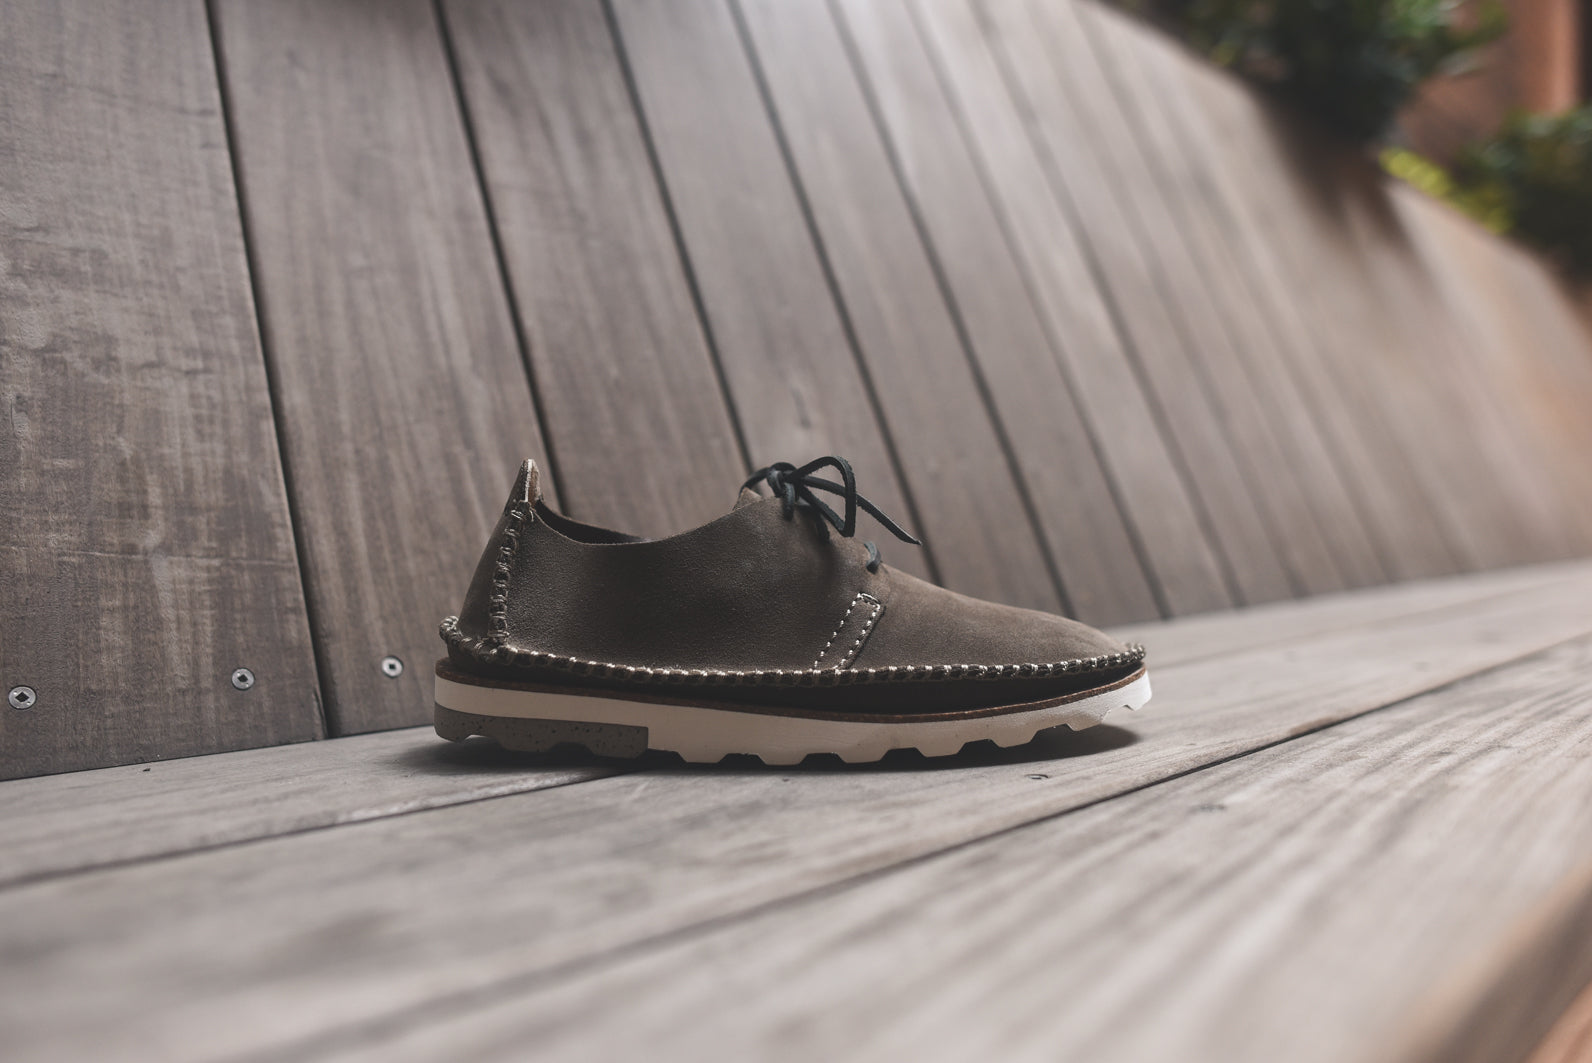 Clarks Summer 2015 Collection Pt. II – Kith